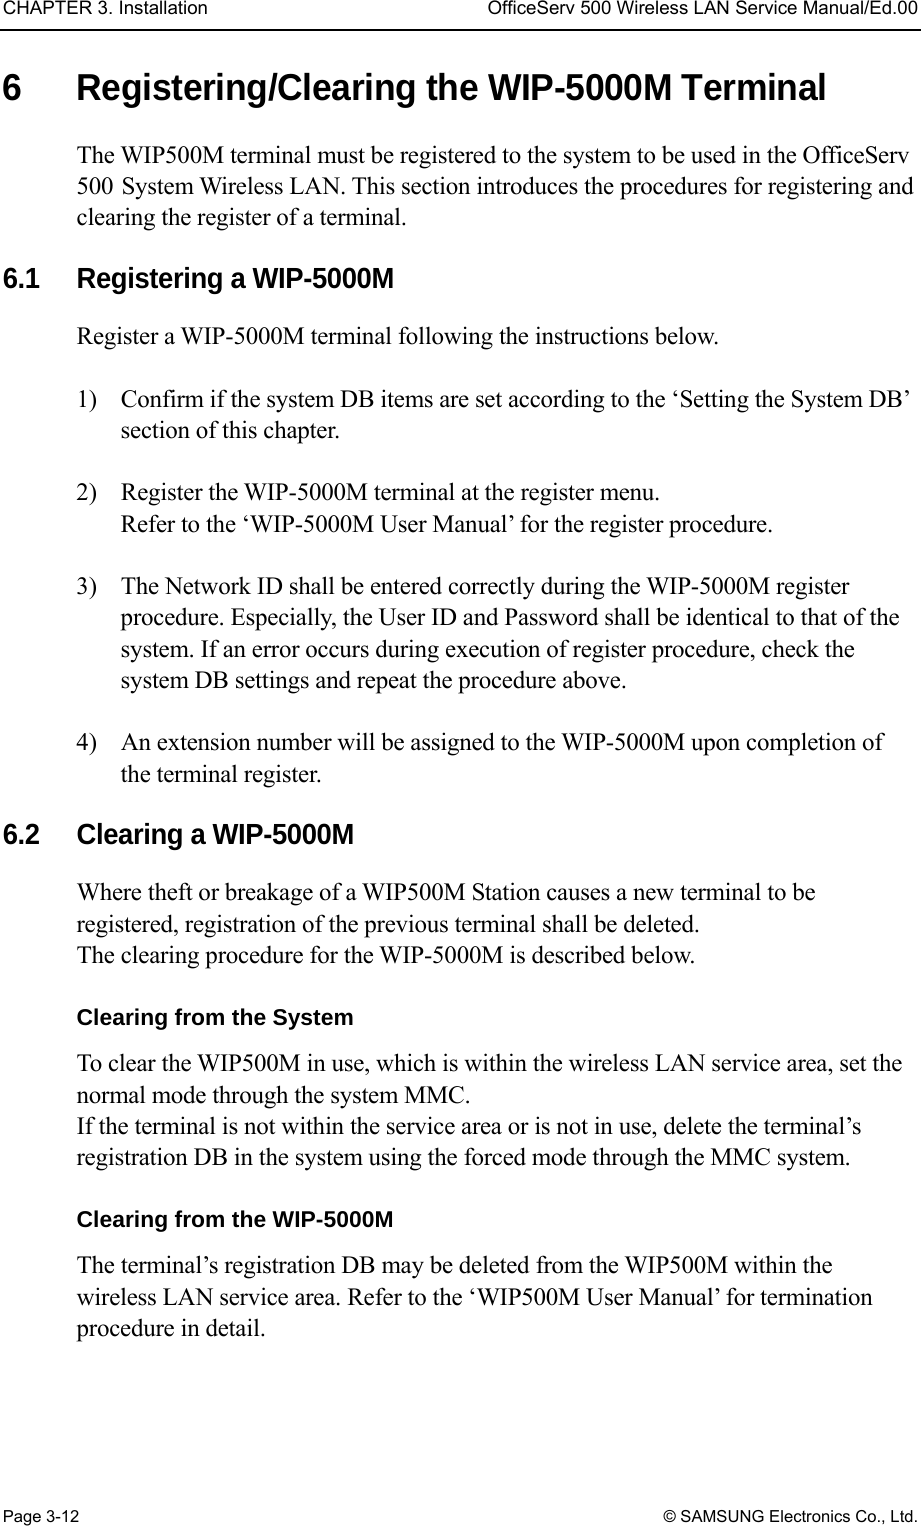 CHAPTER 3. Installation  OfficeServ 500 Wireless LAN Service Manual/Ed.00 Page 3-12 © SAMSUNG Electronics Co., Ltd. 6  Registering/Clearing the WIP-5000M Terminal The WIP500M terminal must be registered to the system to be used in the OfficeServ 500 System Wireless LAN. This section introduces the procedures for registering and clearing the register of a terminal.    6.1  Registering a WIP-5000M   Register a WIP-5000M terminal following the instructions below.  1)    Confirm if the system DB items are set according to the ‘Setting the System DB’ section of this chapter.  2)    Register the WIP-5000M terminal at the register menu.   Refer to the ‘WIP-5000M User Manual’ for the register procedure.  3)    The Network ID shall be entered correctly during the WIP-5000M register procedure. Especially, the User ID and Password shall be identical to that of the system. If an error occurs during execution of register procedure, check the system DB settings and repeat the procedure above.  4)    An extension number will be assigned to the WIP-5000M upon completion of the terminal register.  6.2    Clearing a WIP-5000M   Where theft or breakage of a WIP500M Station causes a new terminal to be registered, registration of the previous terminal shall be deleted.   The clearing procedure for the WIP-5000M is described below.  Clearing from the System To clear the WIP500M in use, which is within the wireless LAN service area, set the normal mode through the system MMC.   If the terminal is not within the service area or is not in use, delete the terminal’s registration DB in the system using the forced mode through the MMC system.    Clearing from the WIP-5000M The terminal’s registration DB may be deleted from the WIP500M within the wireless LAN service area. Refer to the ‘WIP500M User Manual’ for termination procedure in detail.   